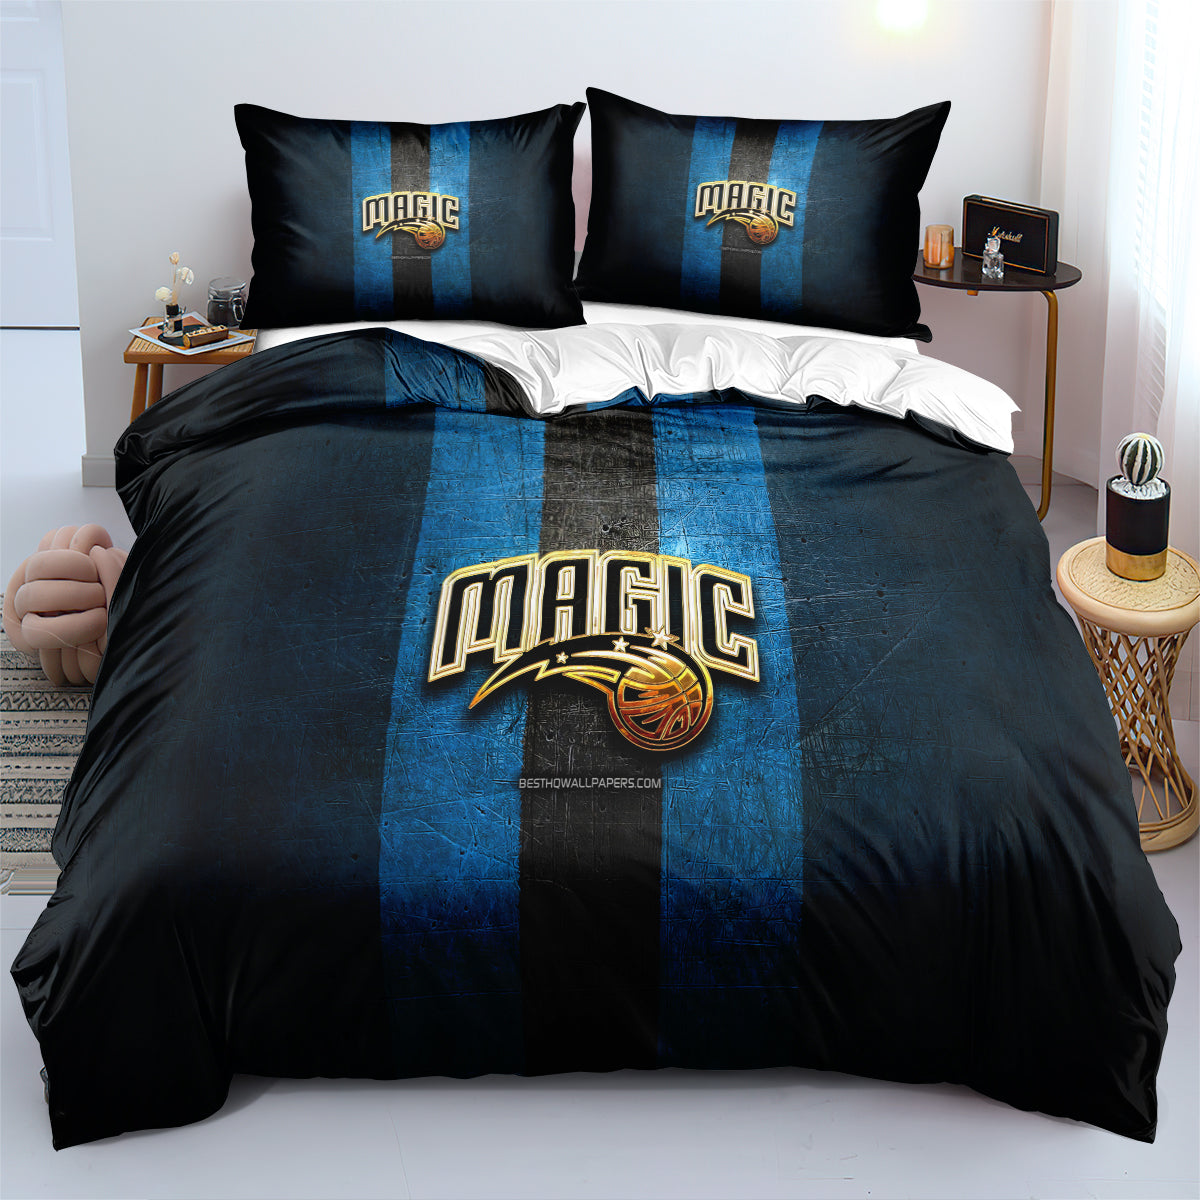 Orlando Basketball Magic Bedding Set Quilt Cover Without Filler